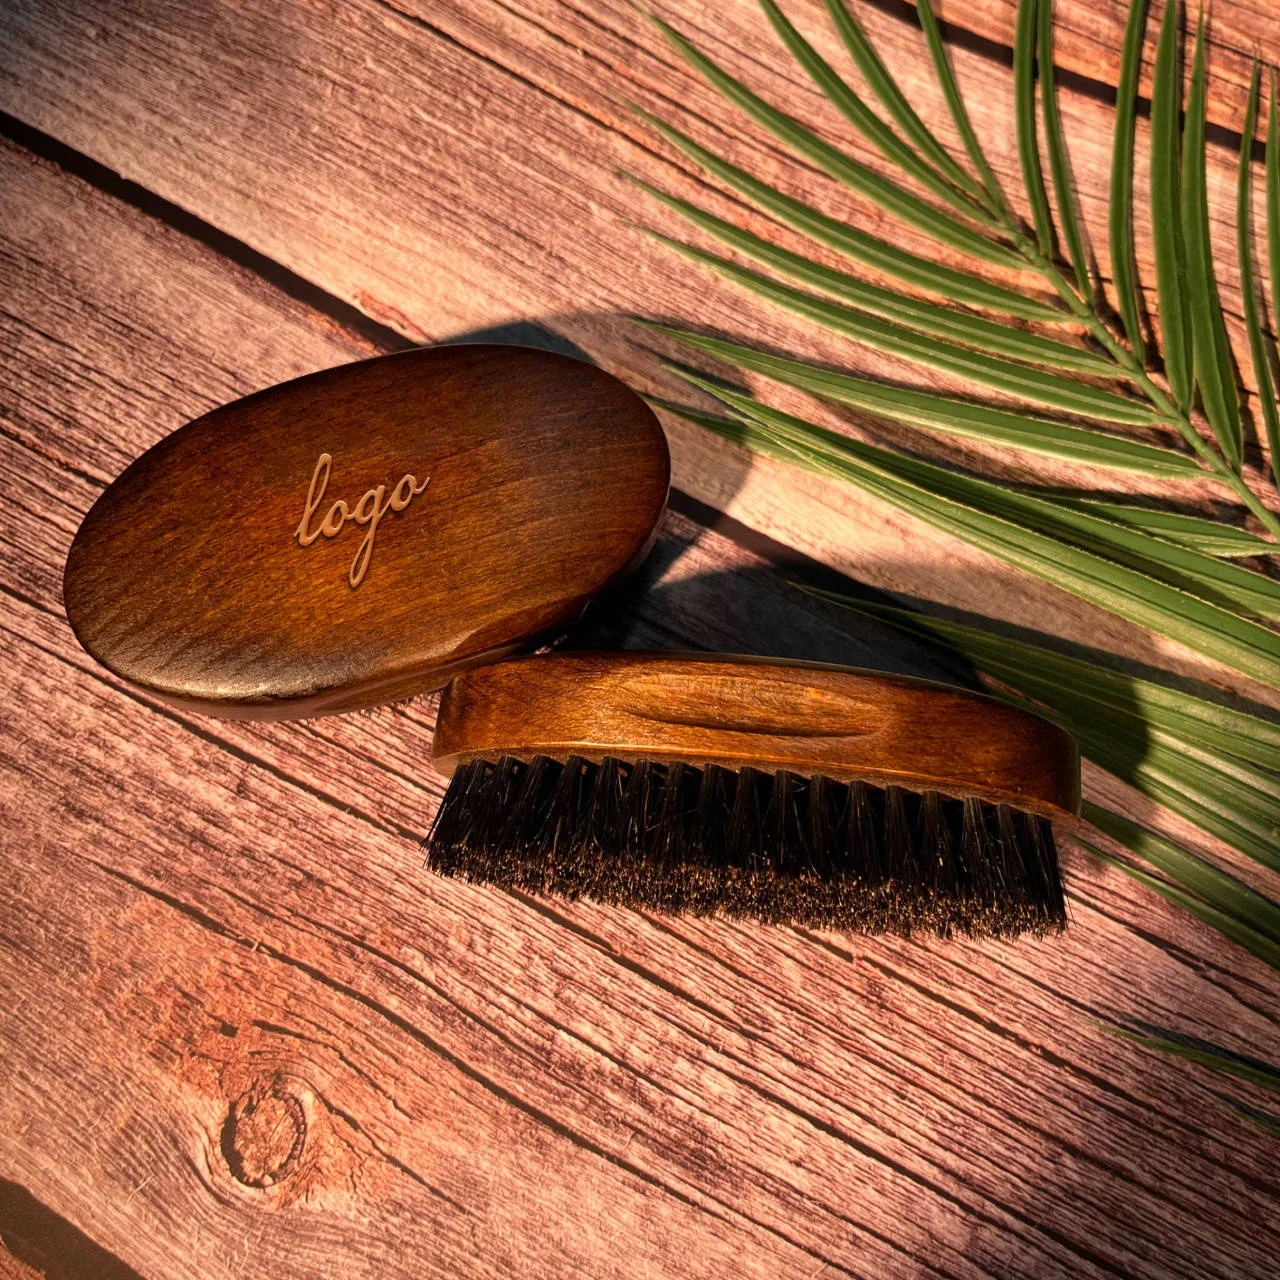 

Top Selling Antique Color Restoring Ancient Ways Color Wooden Beard Brush With Wild Boar Bristles Wooden Beard Brush For Men